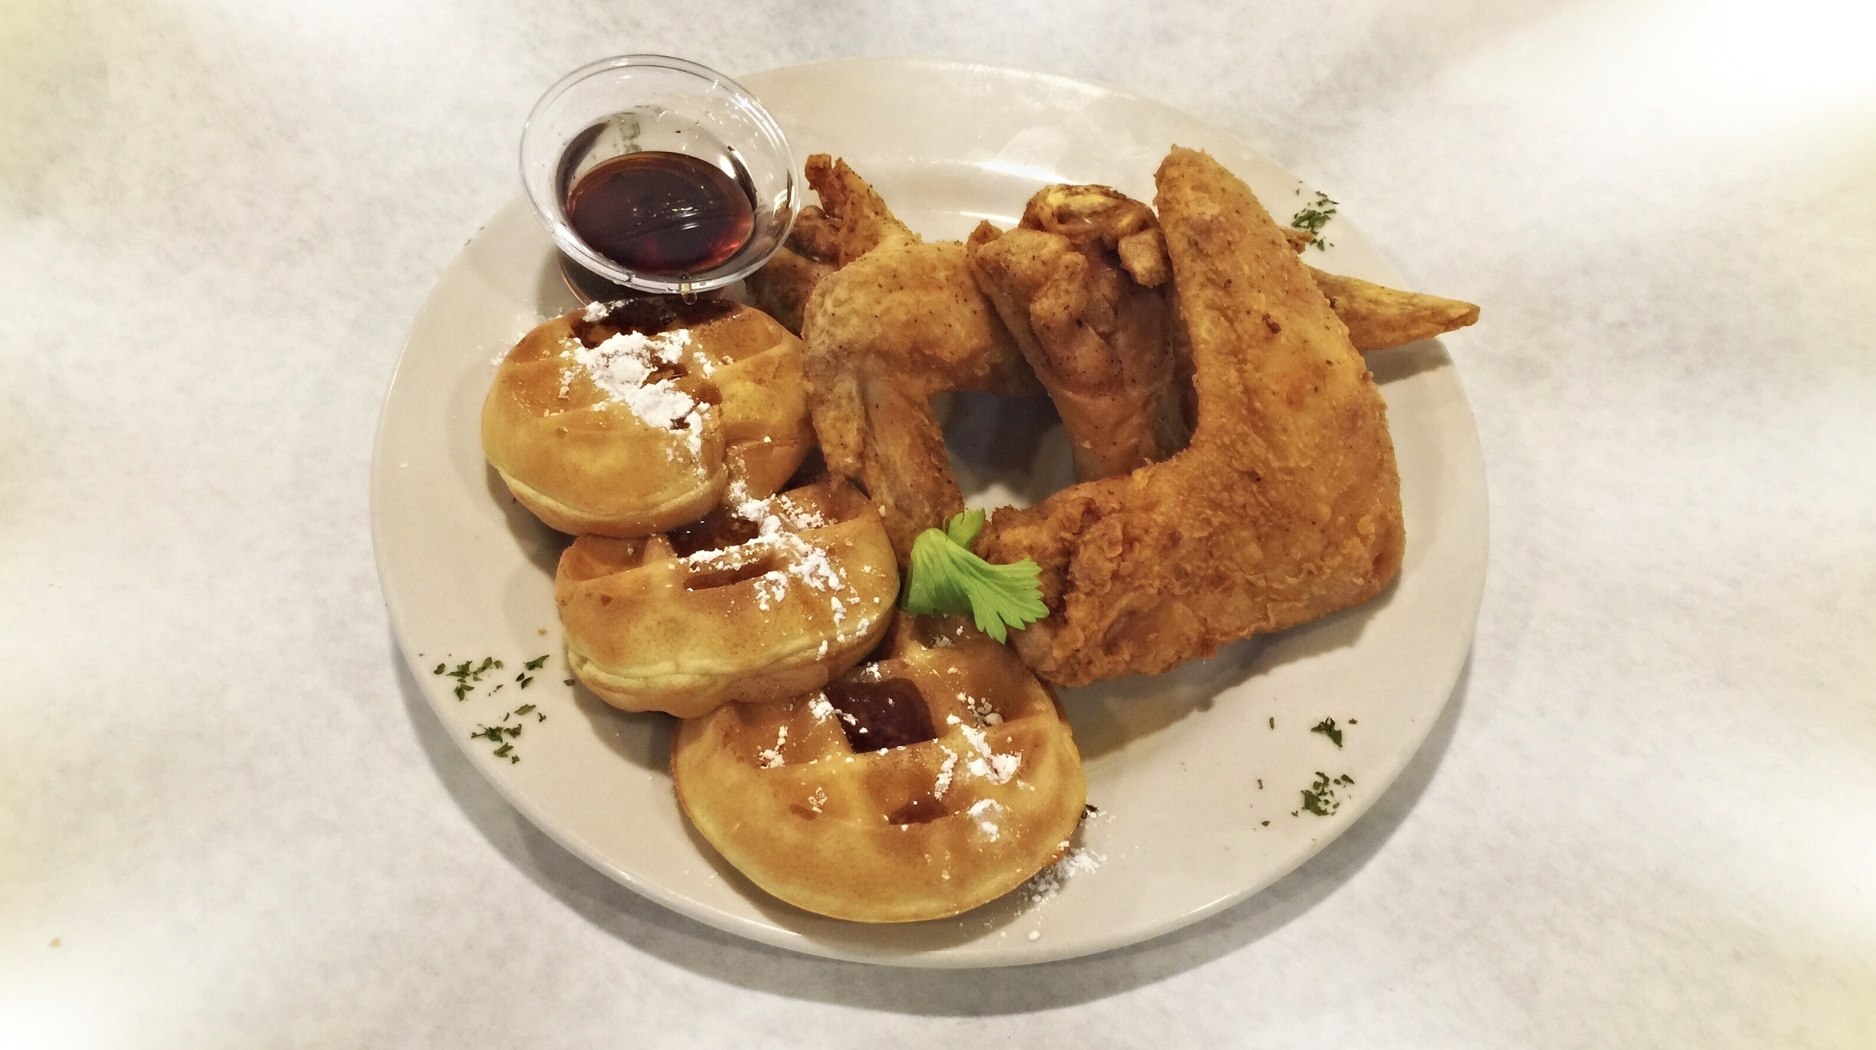 fried chicken, waffles, and syrup served on a plate at pearls place in chicago